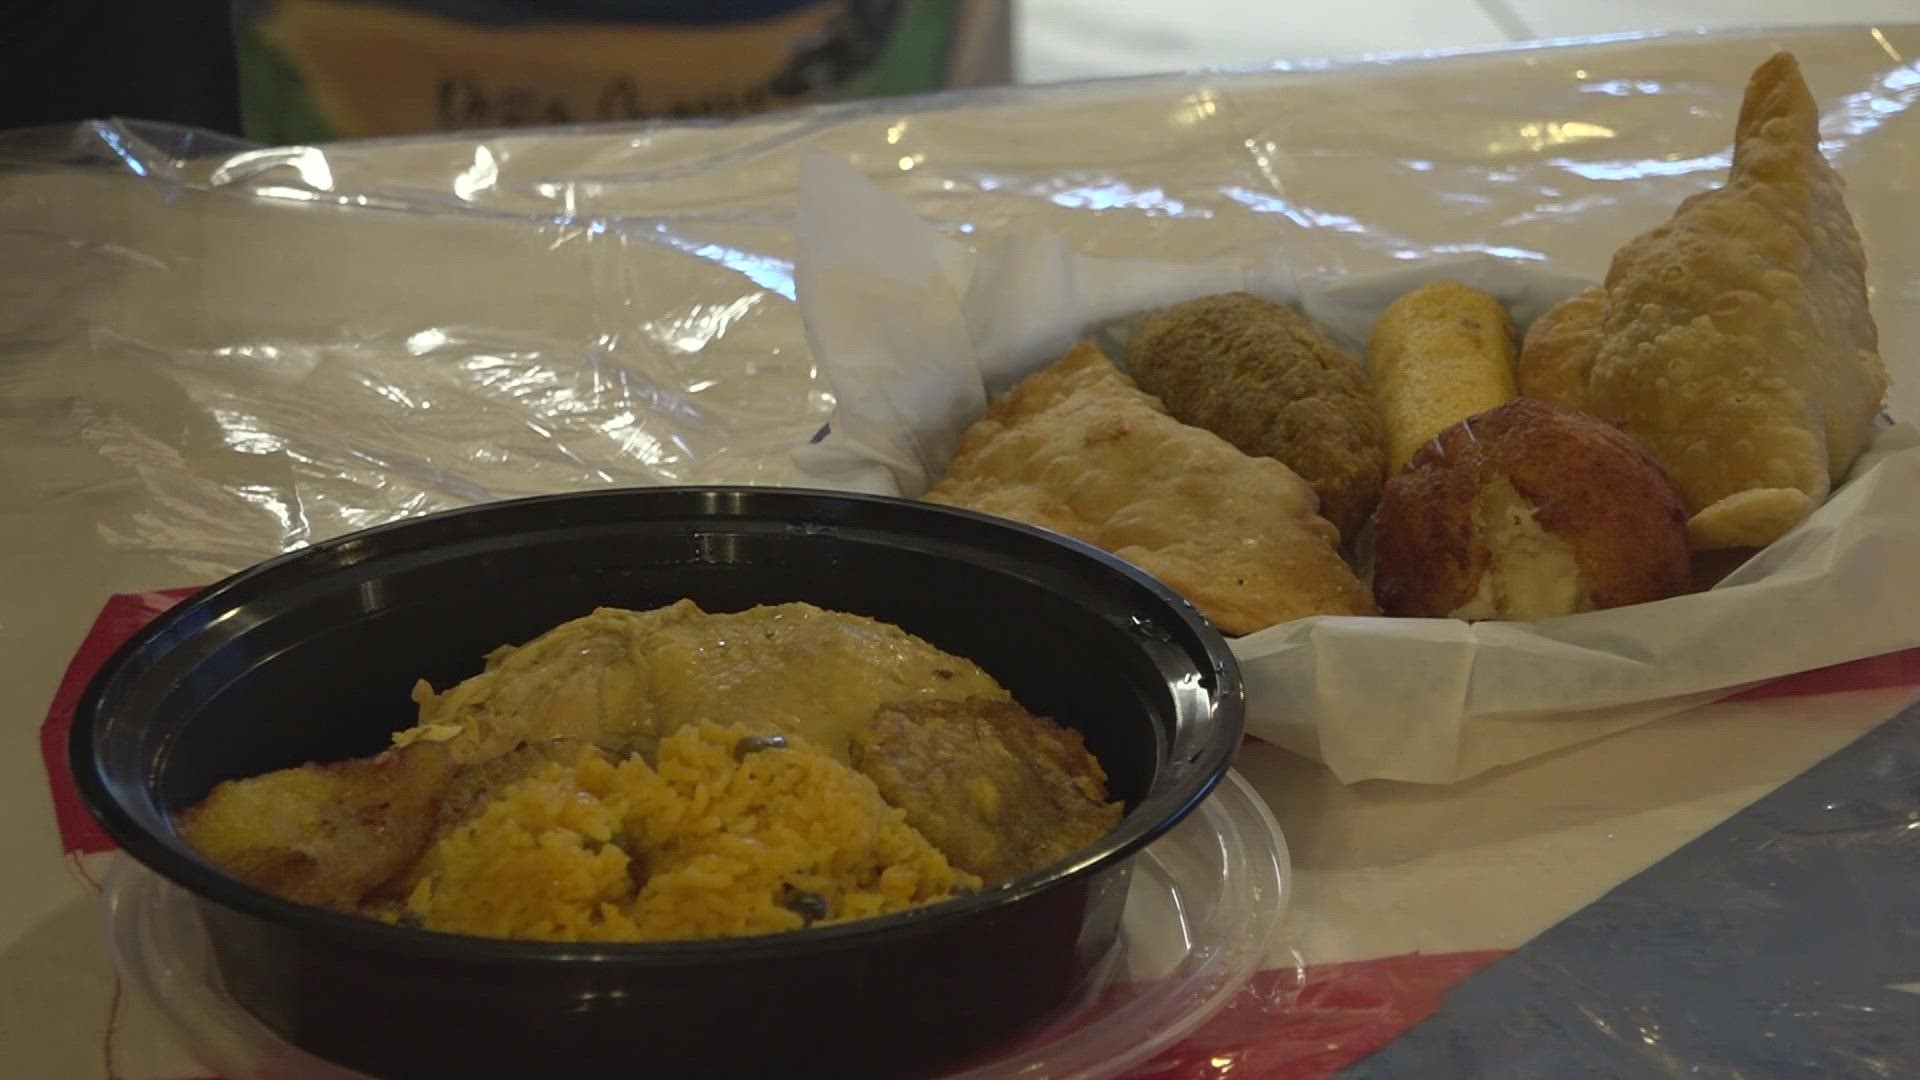 Hispanic owners hope to spread richness of culture through food.